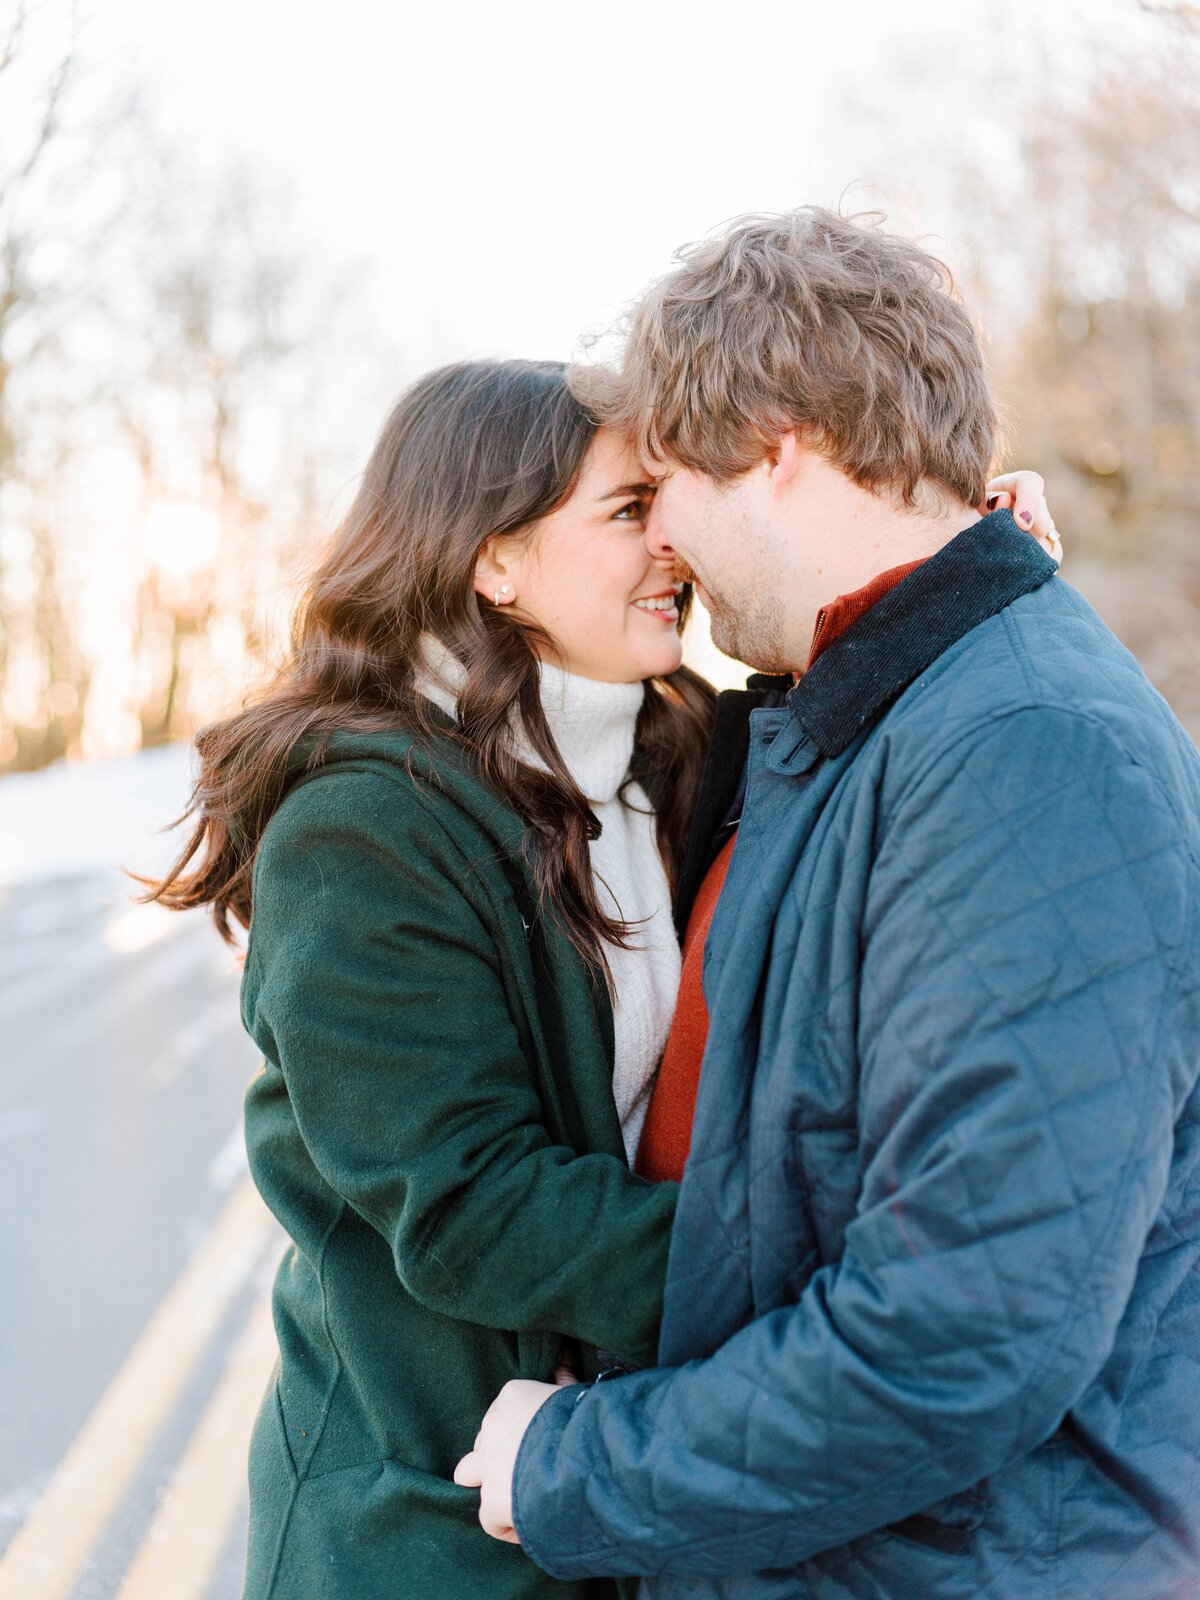 Jamie & Will Blowing Rock NC Winter Engagement Session_0766